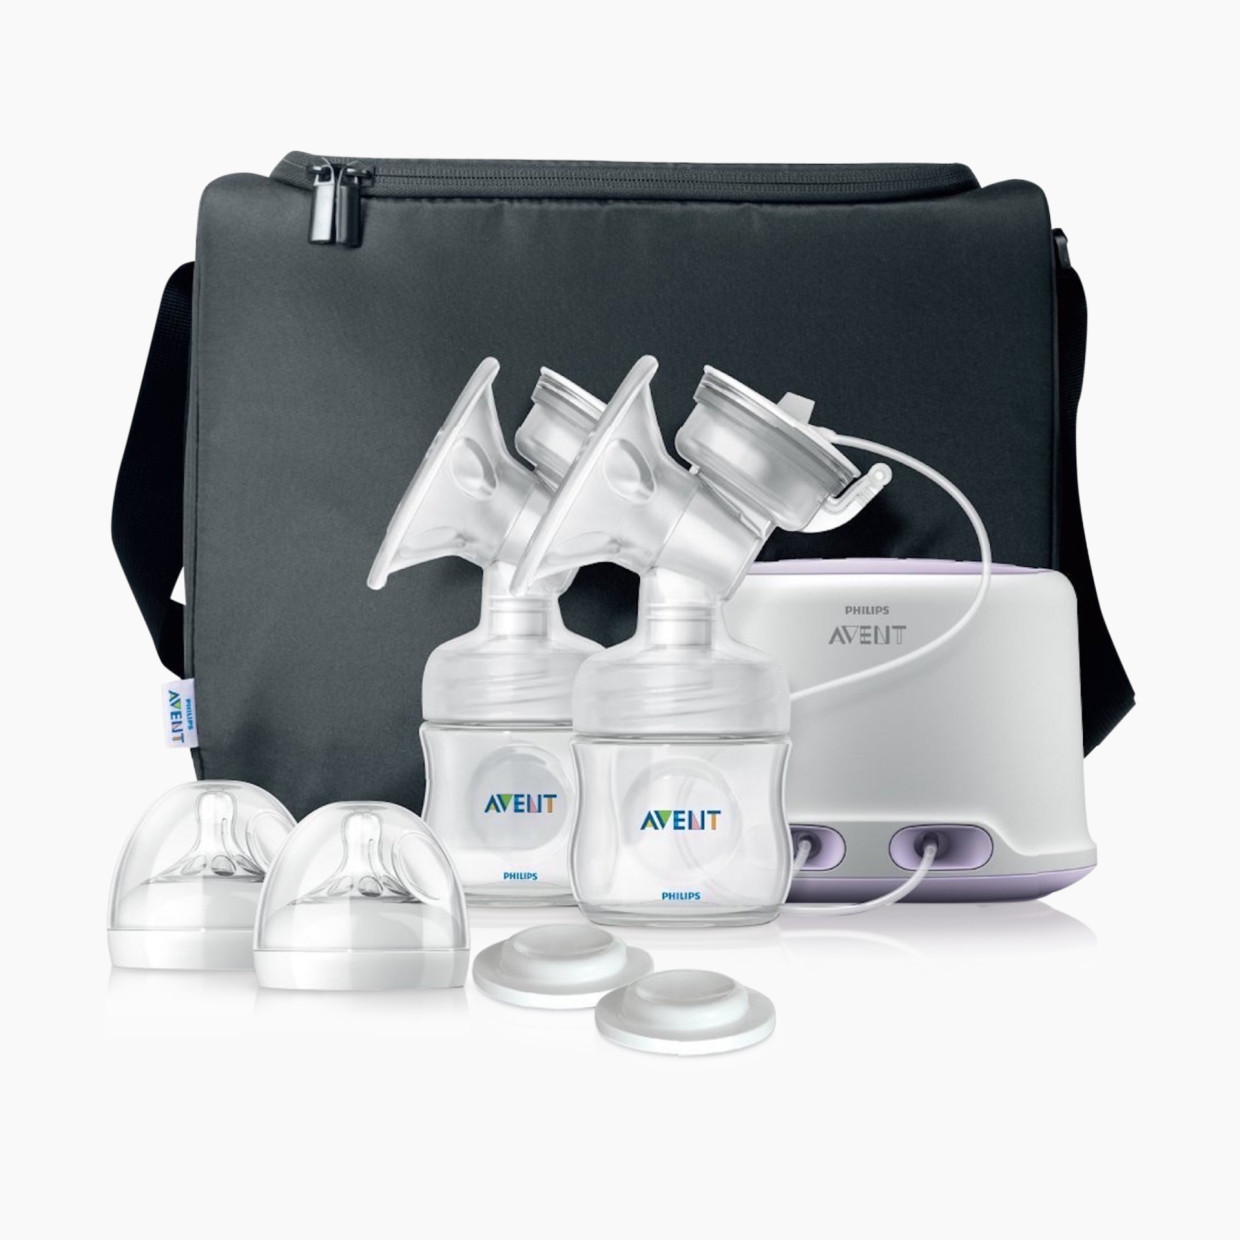 Philips Avent Double Electric Breast Pump.